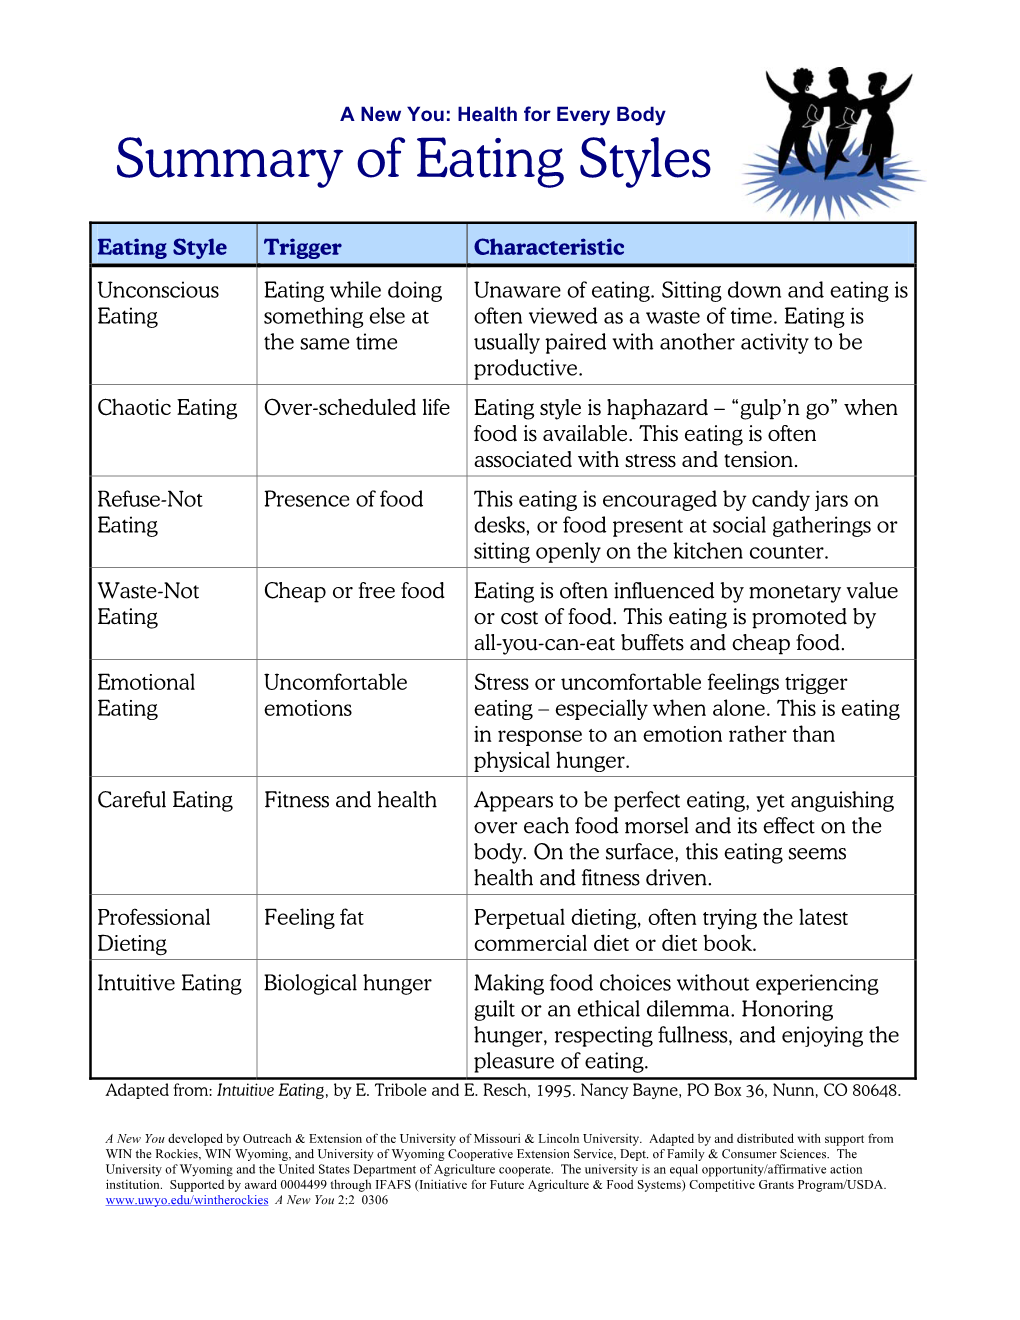 Summary of Eating Styles